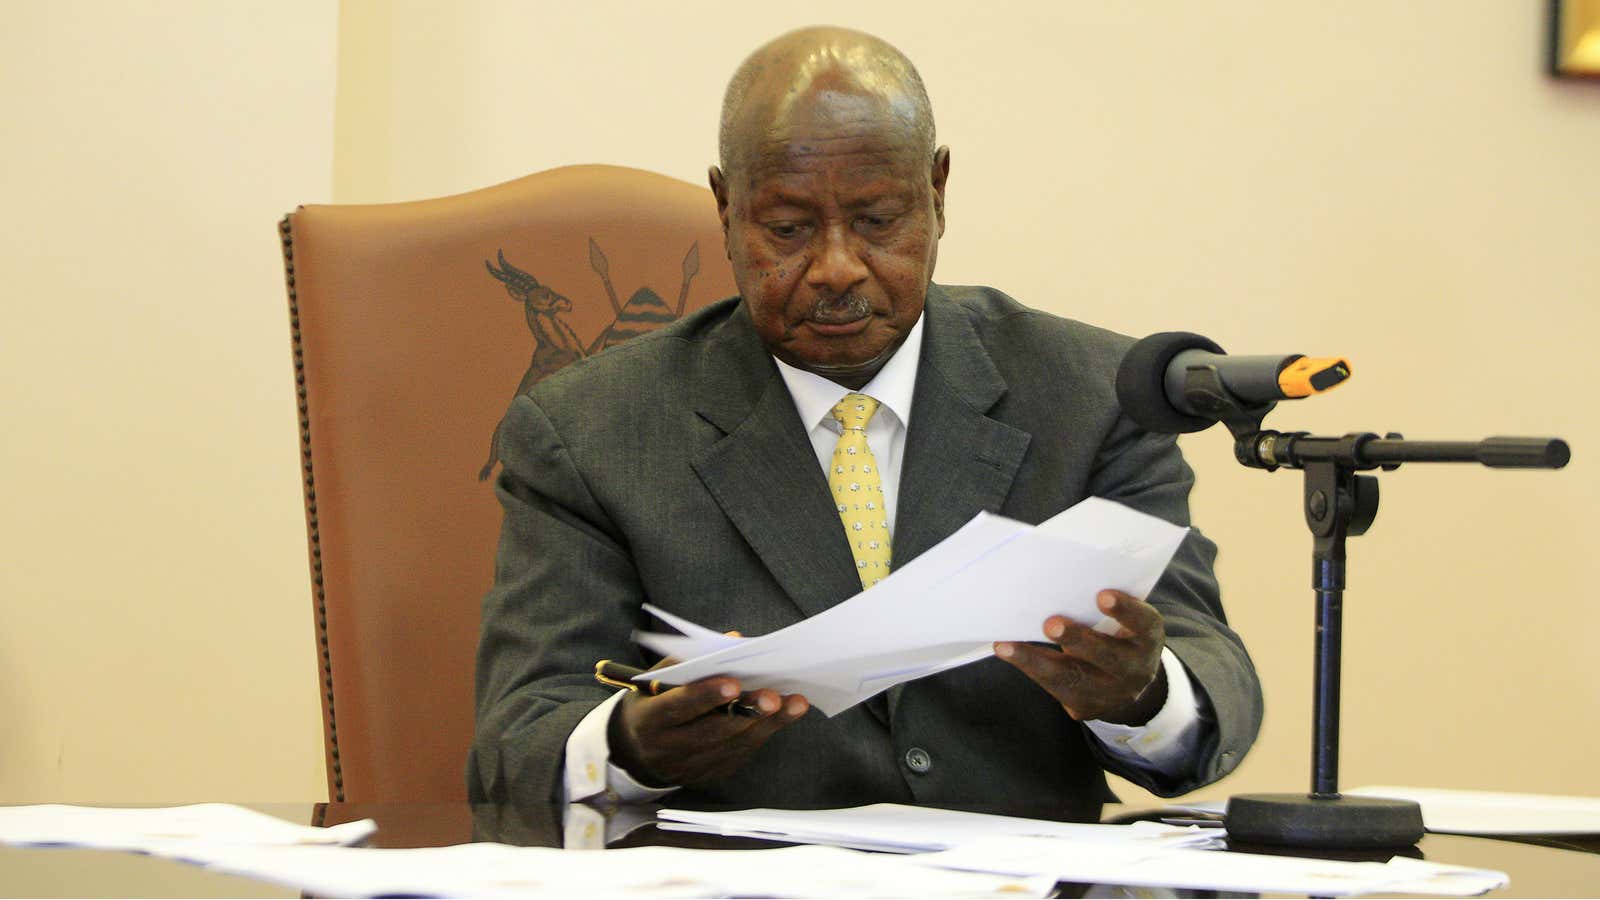 Moral policing is nothing new in Uganda, where president Museveni signed an anti-gay law in 2014.